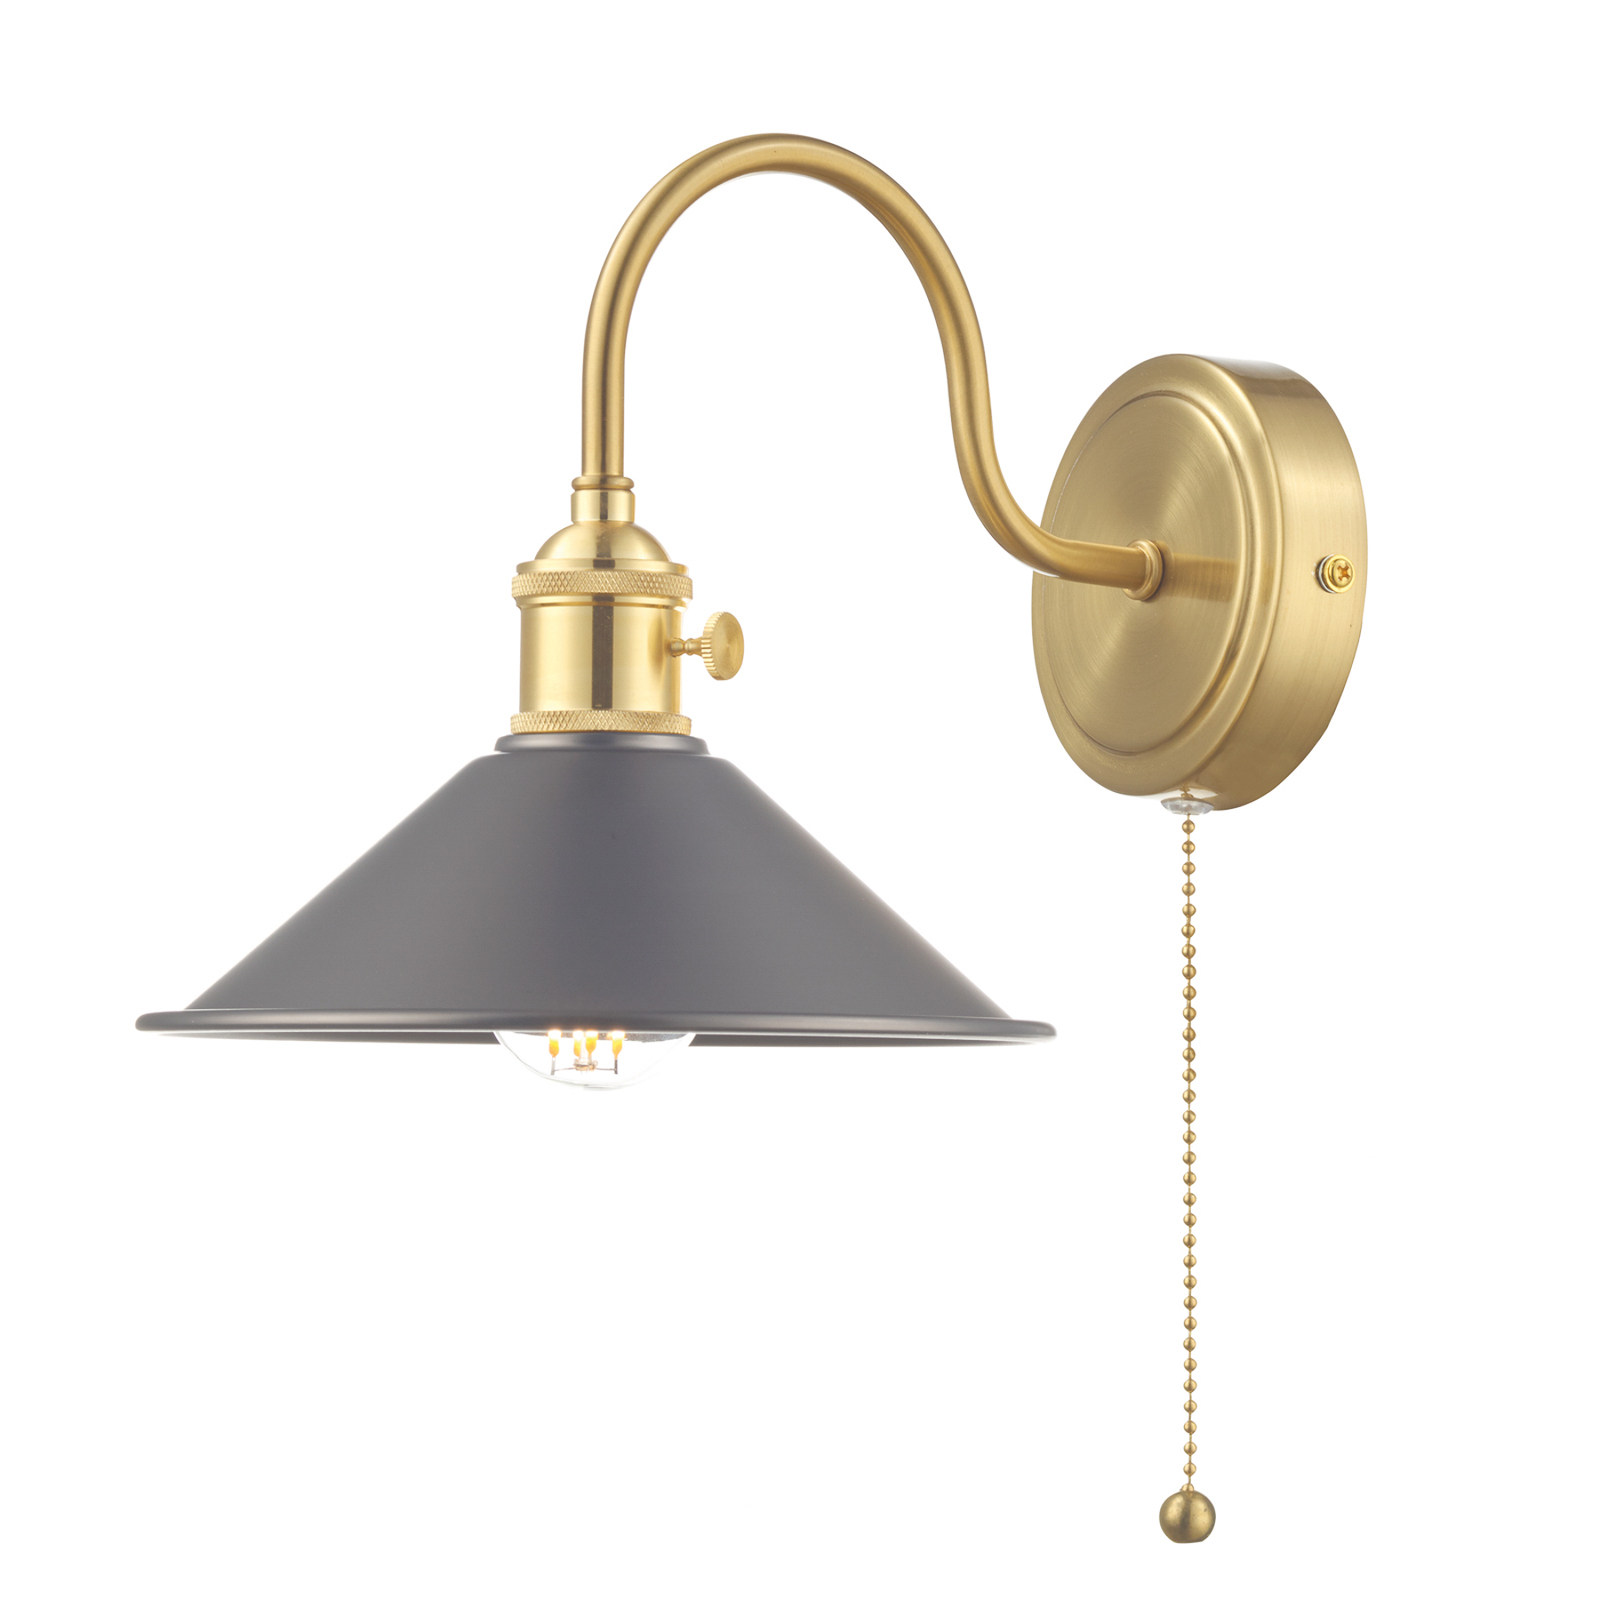 Hadano wall light in brass, antique pewter lampshade